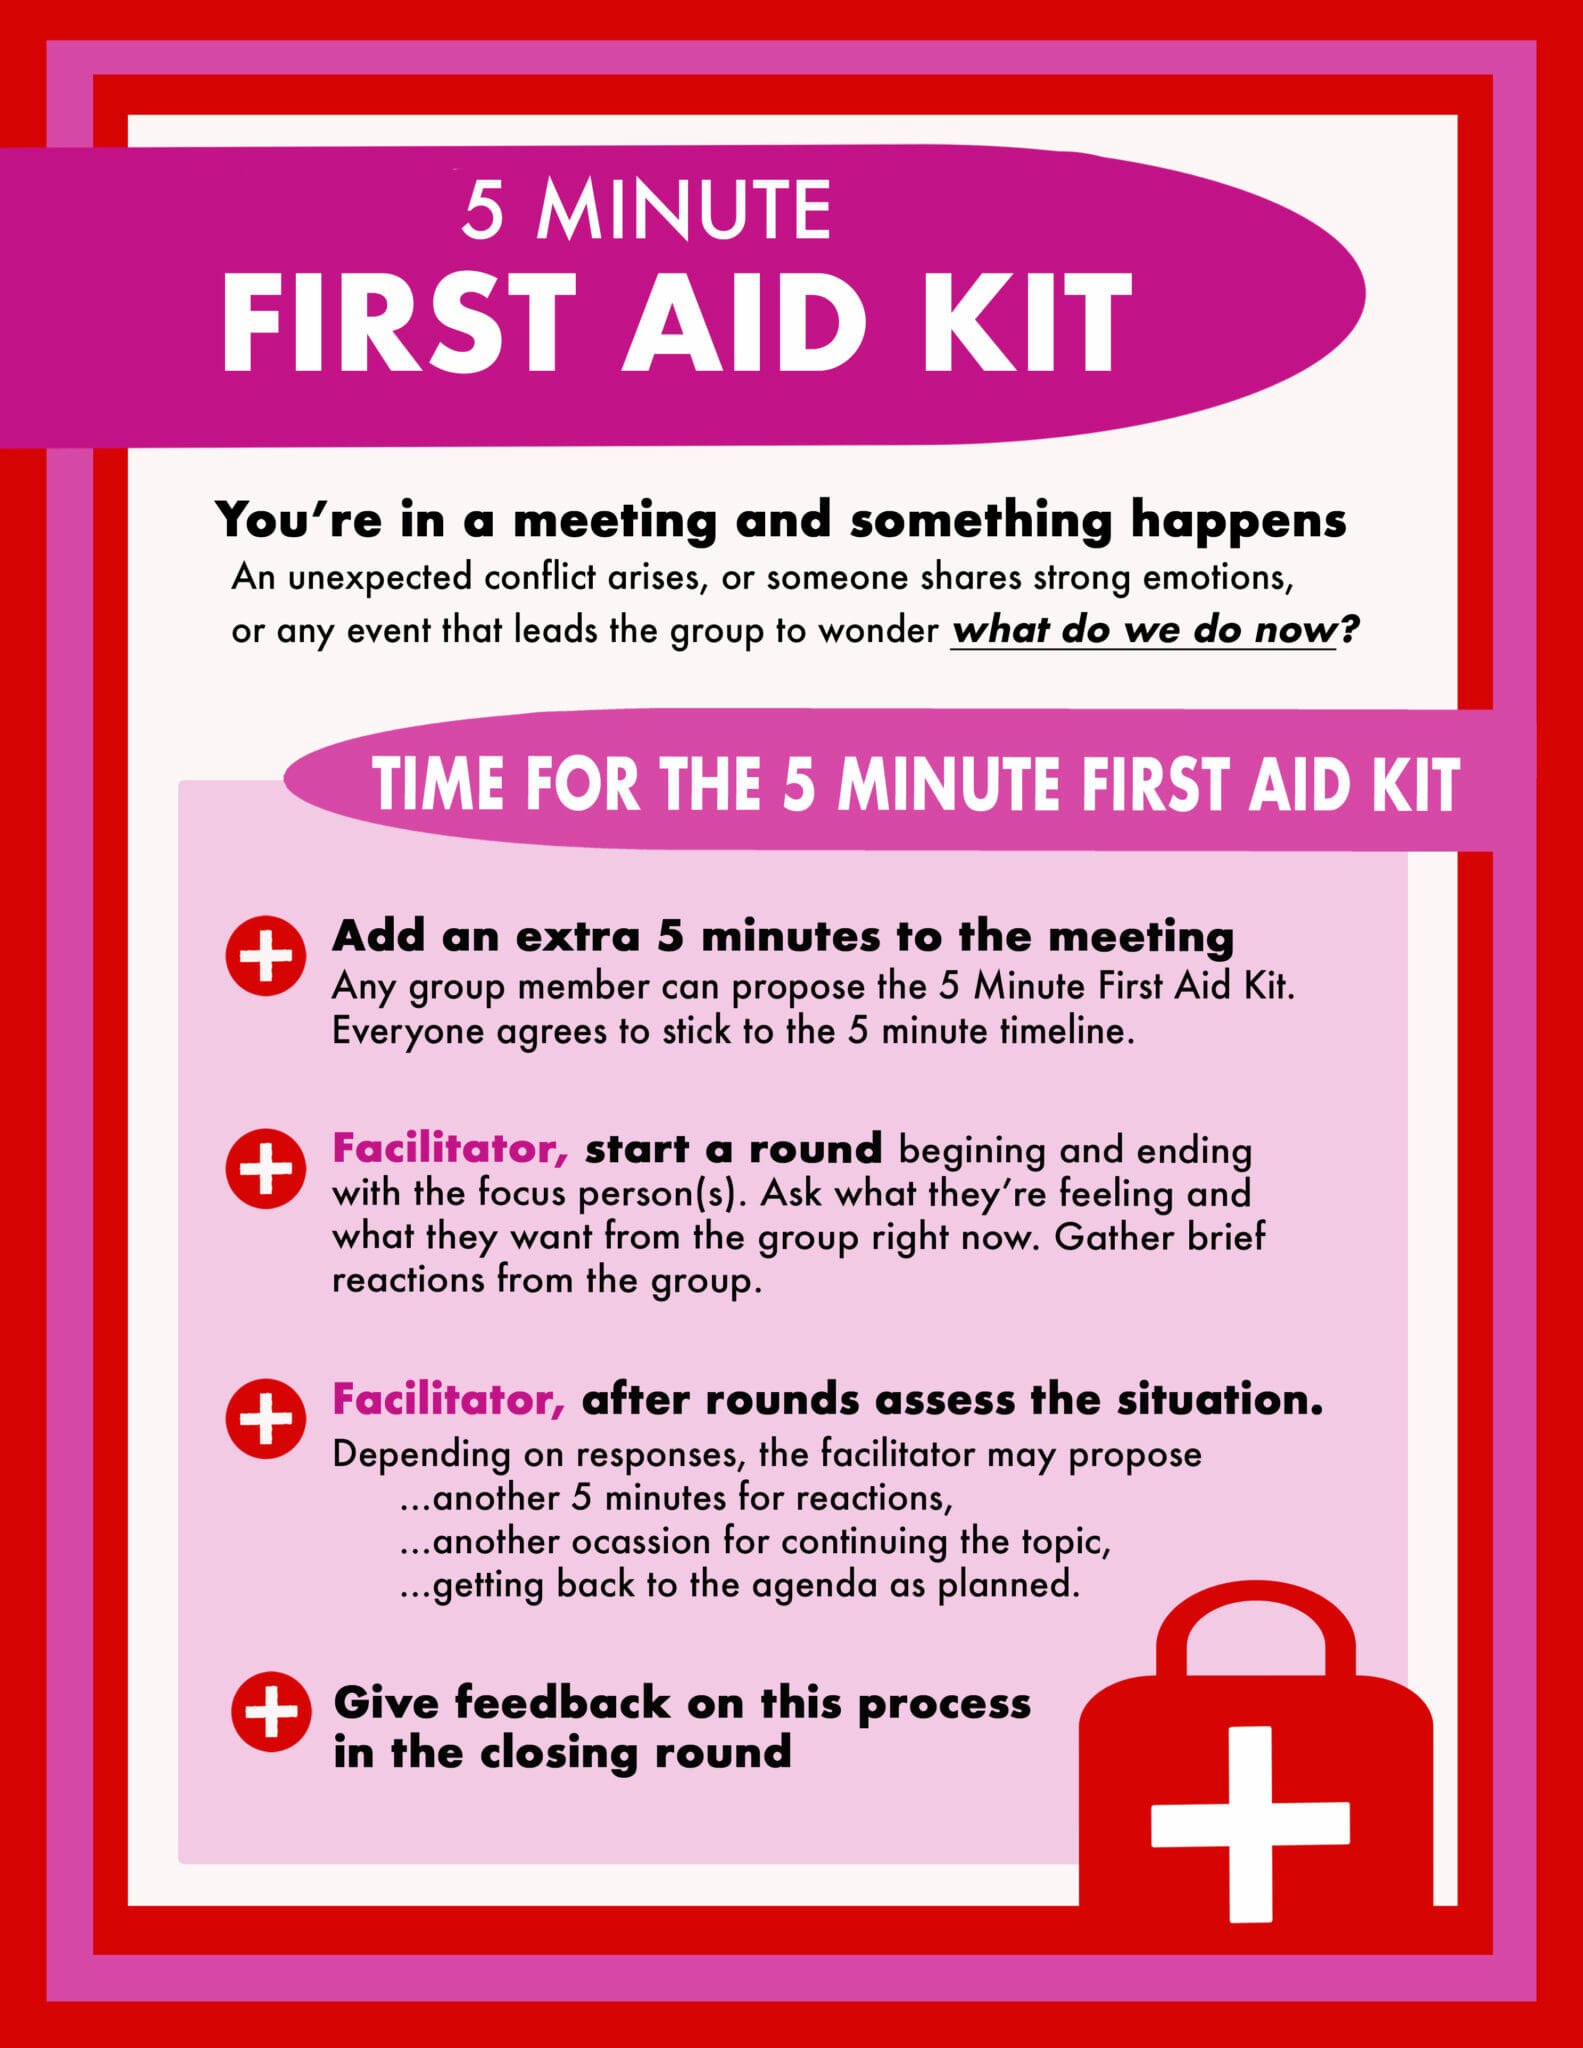 The 5 Minute First Aid Kit from Dem Steve for meetings in sociocracy - Sociocracy For All